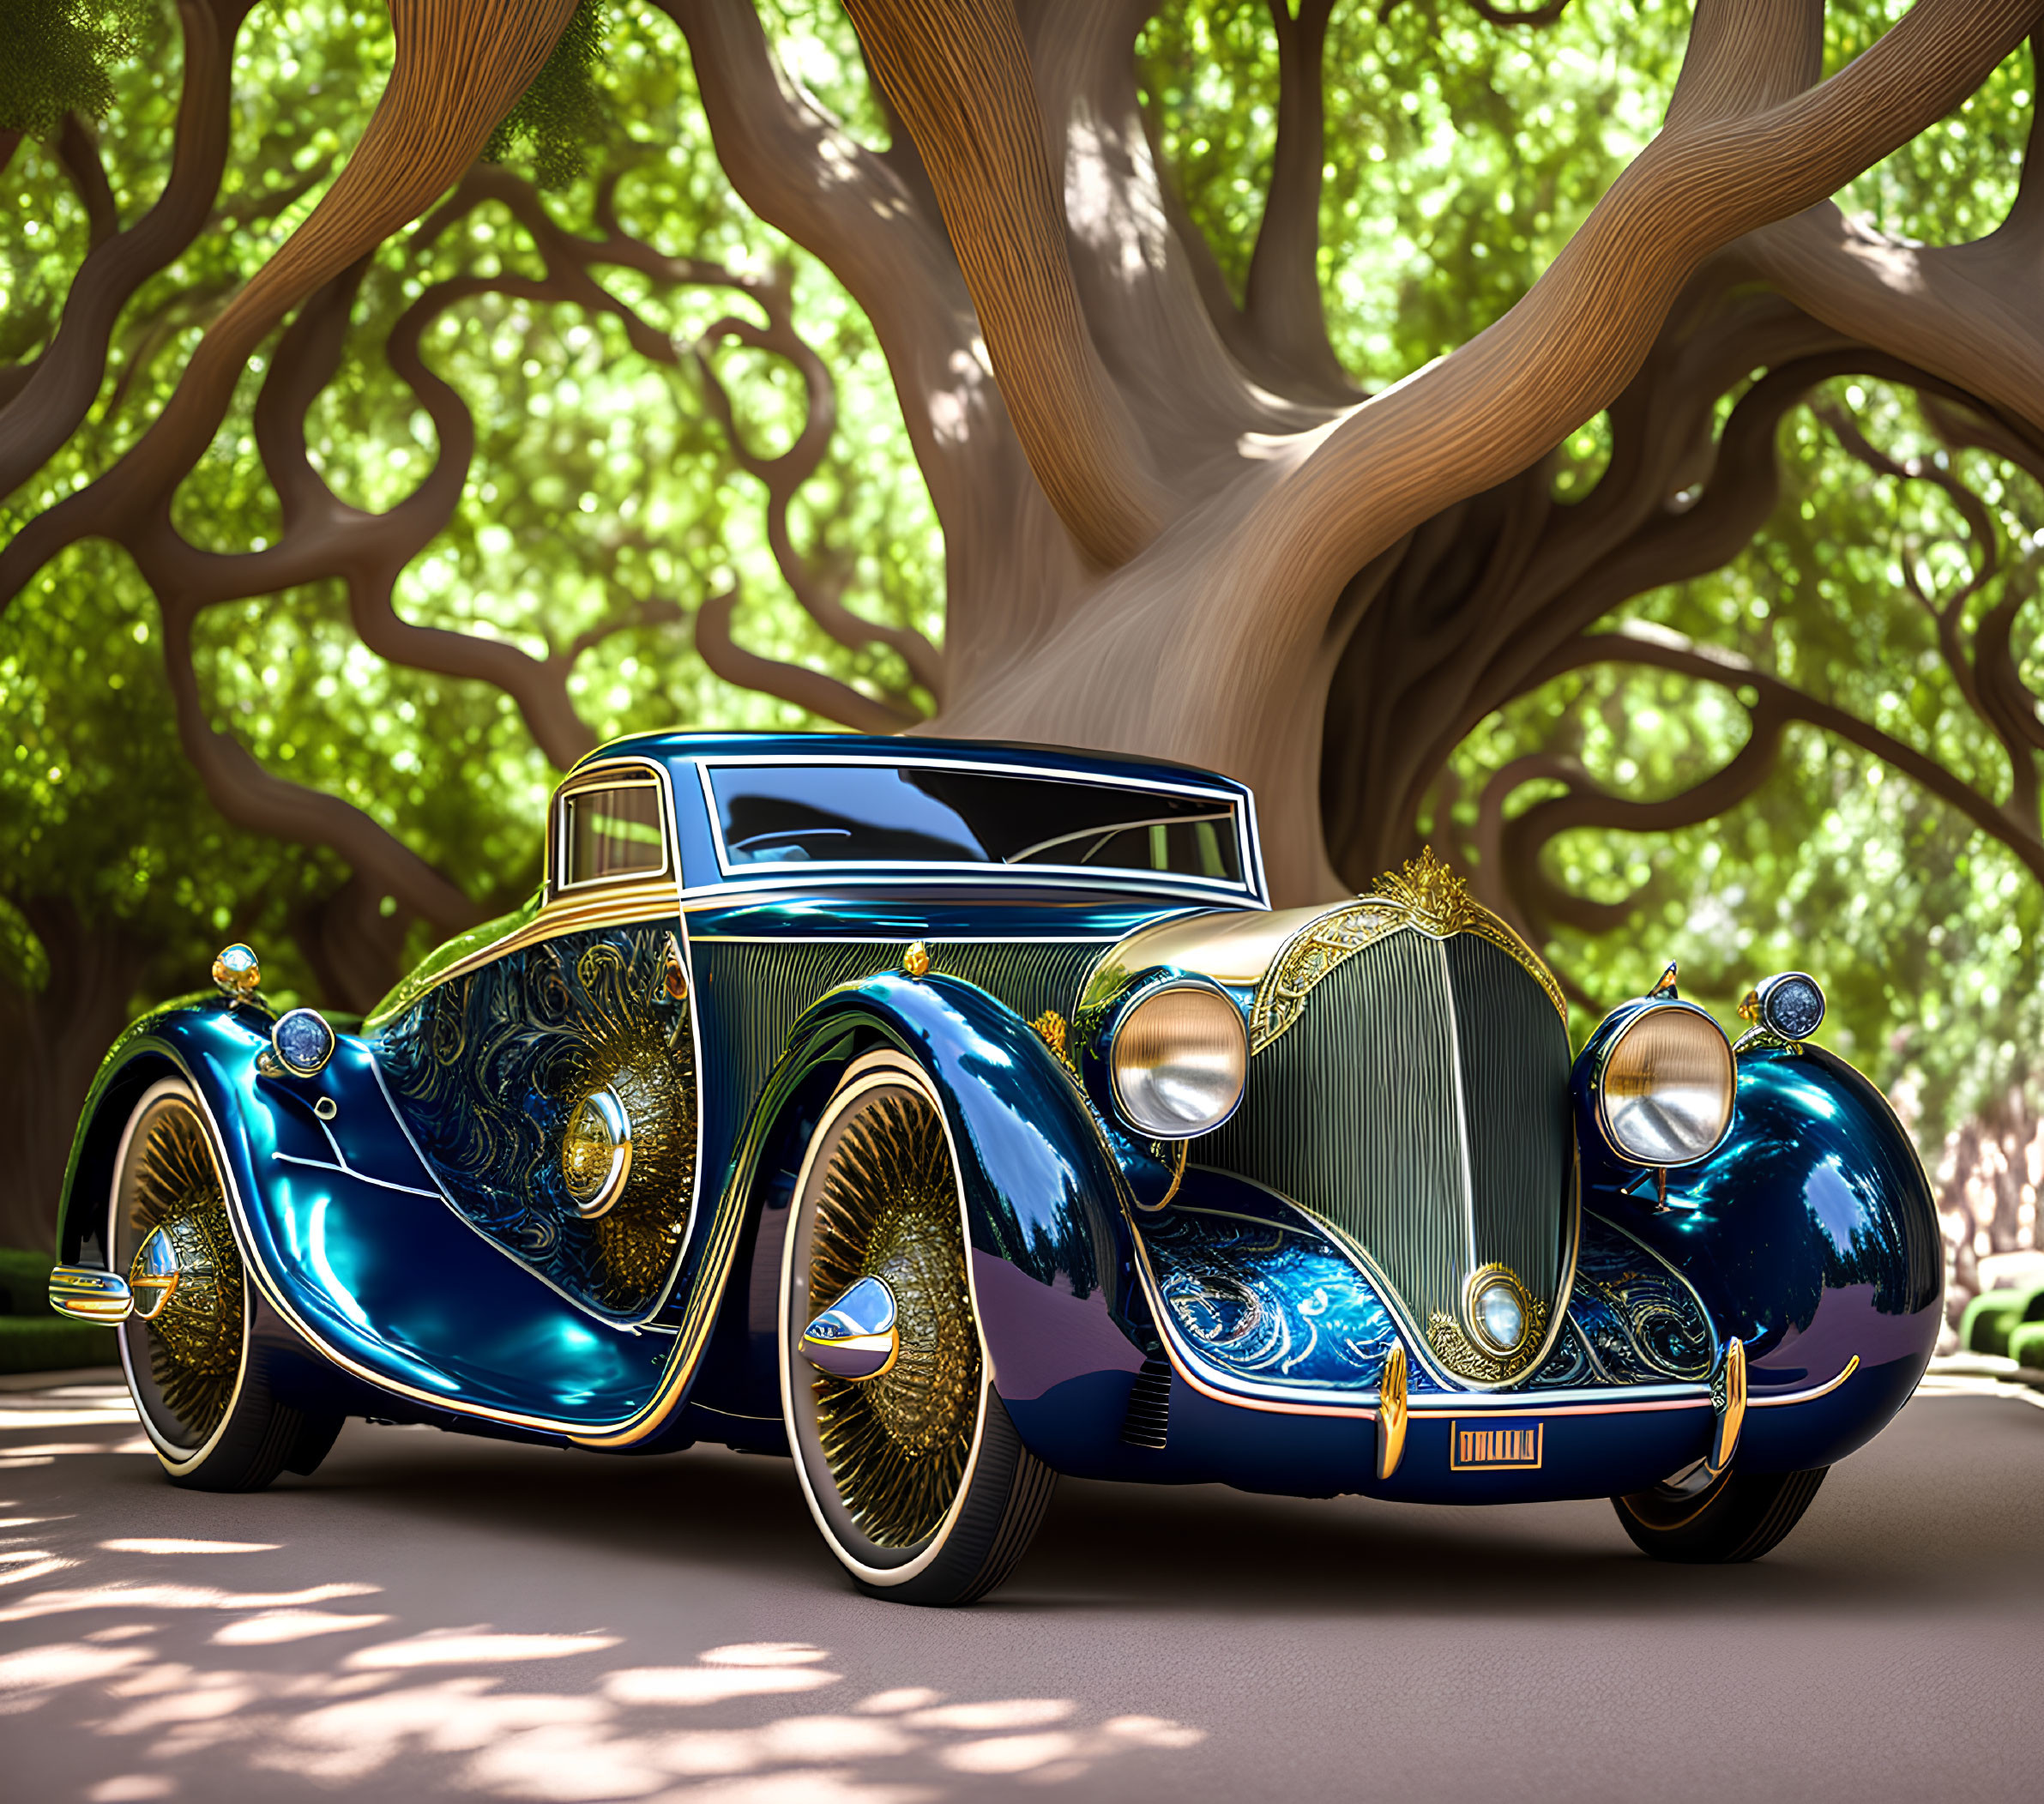 Vintage Car with Gold Detailing and Blue Finish Under Twisting Tree